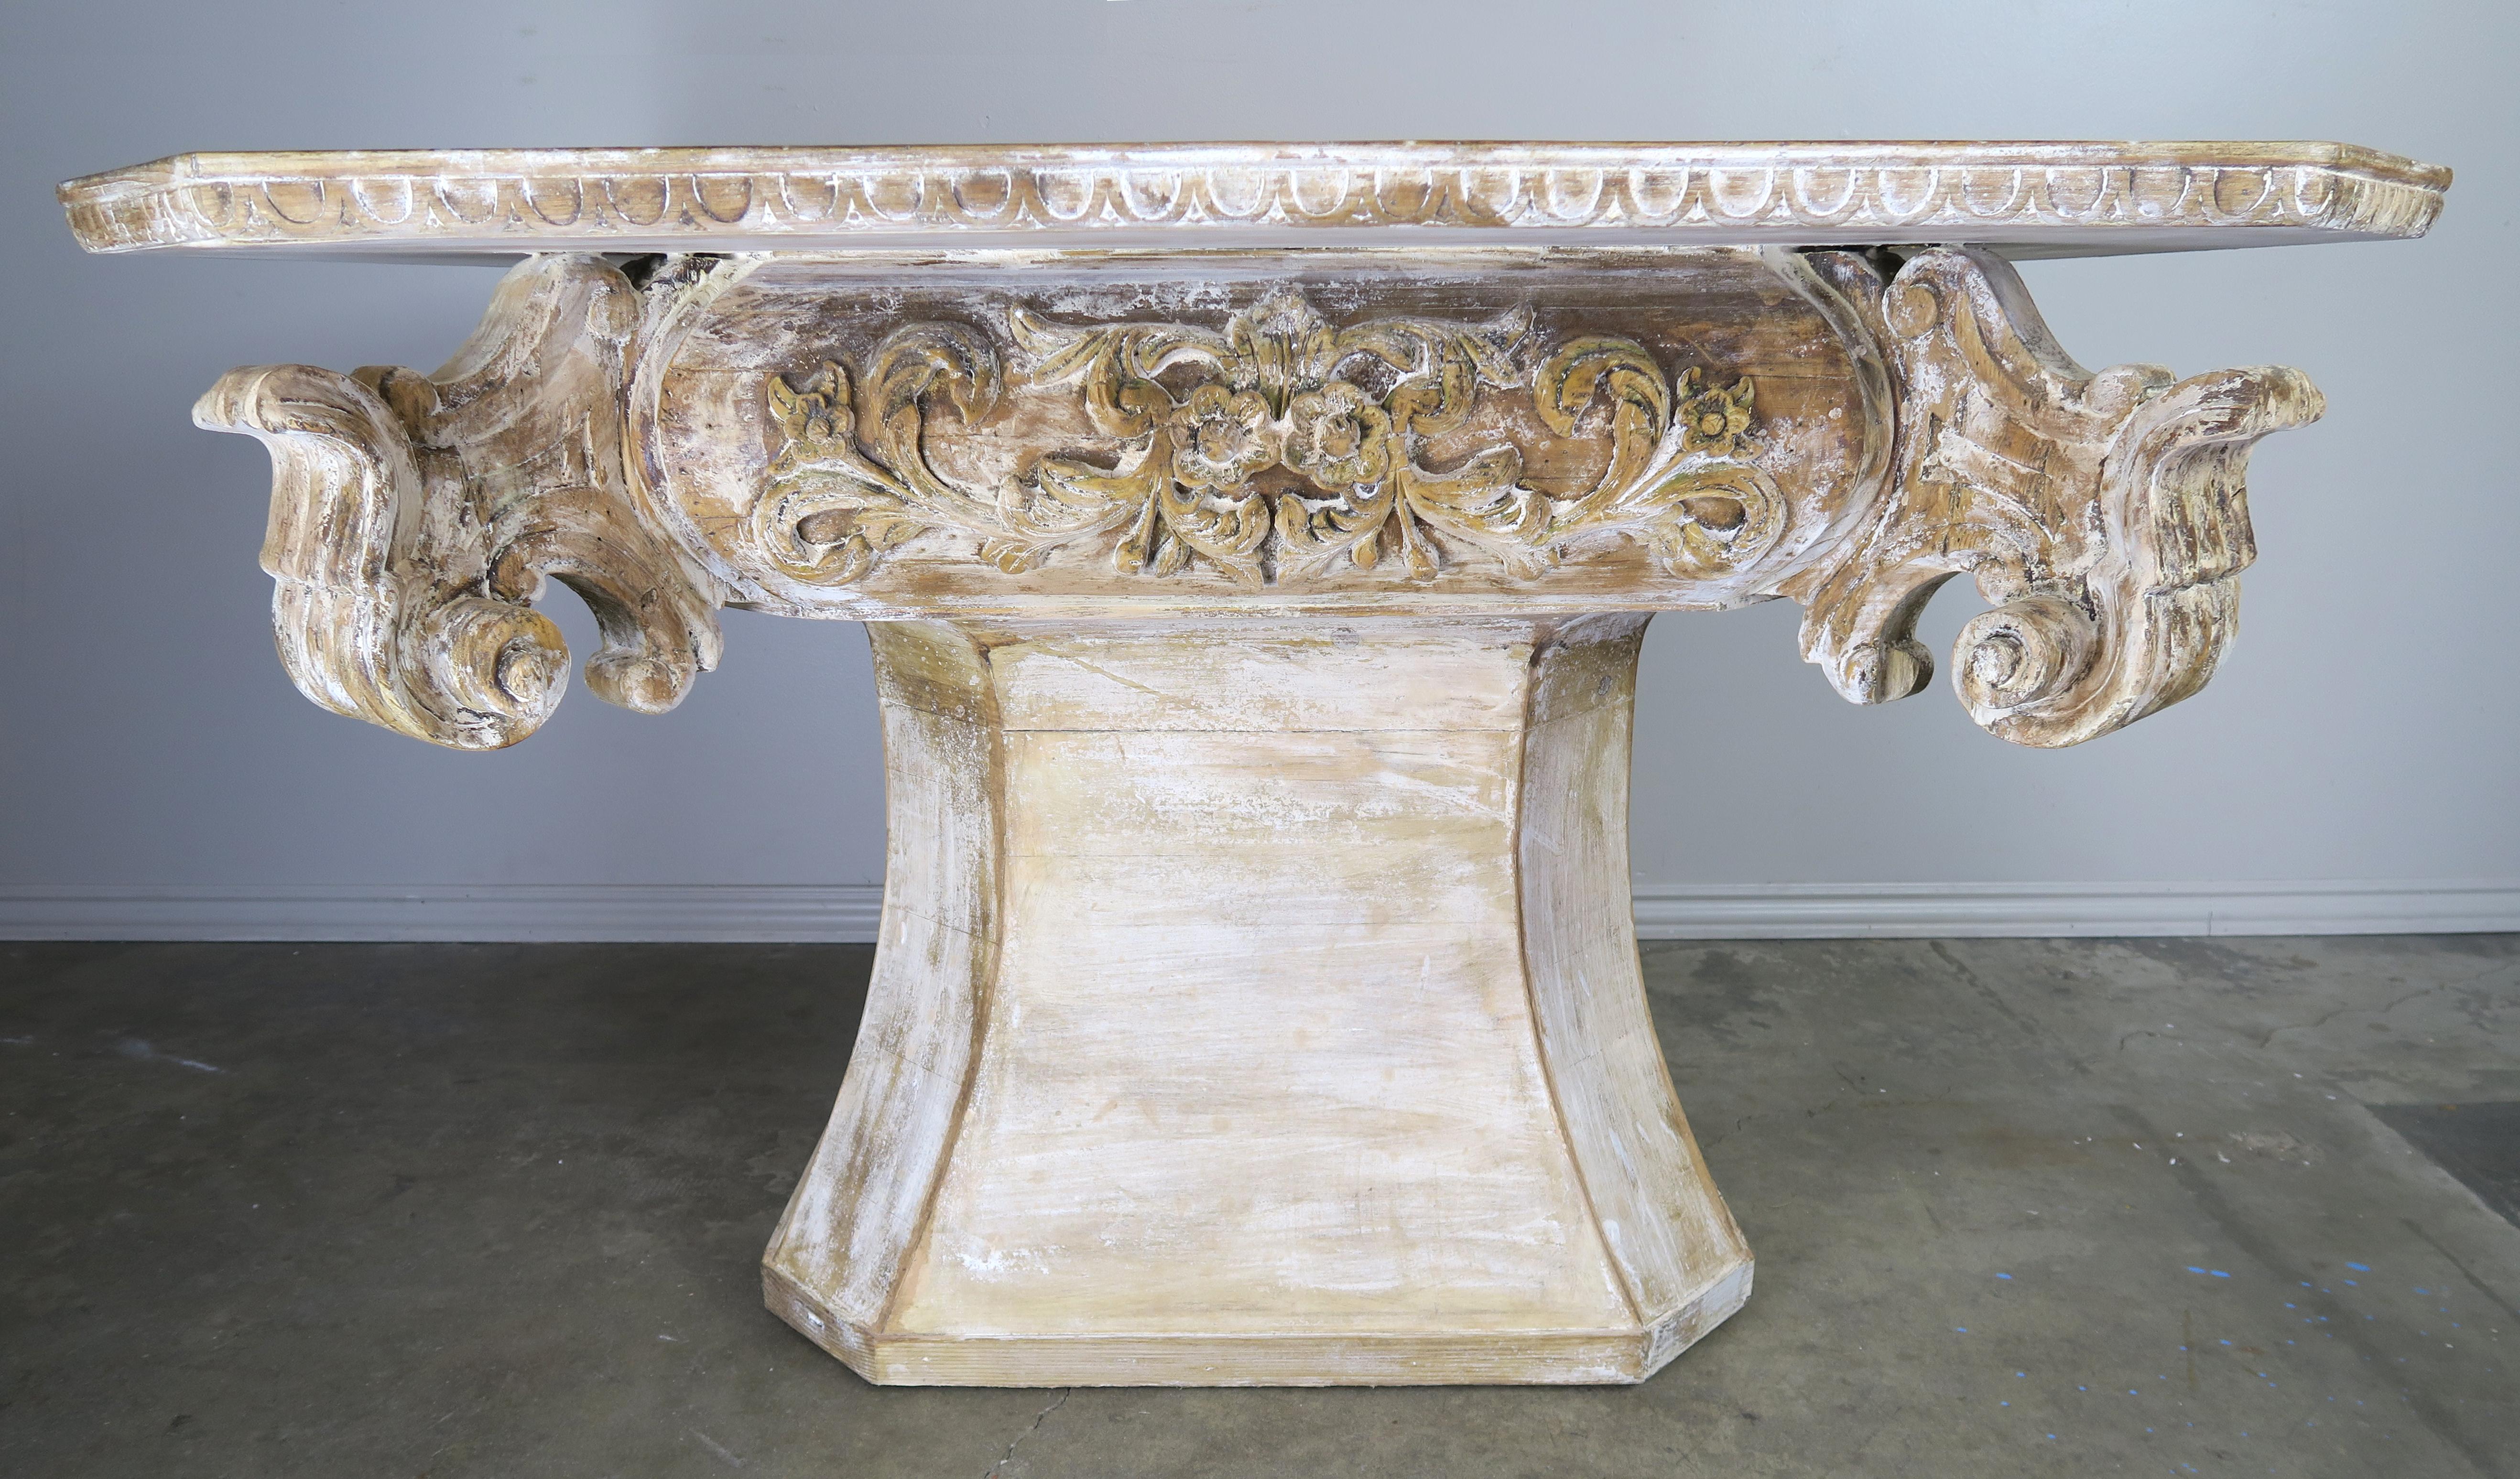 Unique painted dining or center table with a beautiful white washed finish, 1930s. The table has a slight rectangular shaped top with straight corners and an egg and dart carved detail along the edge. The top is supported by an eight sided